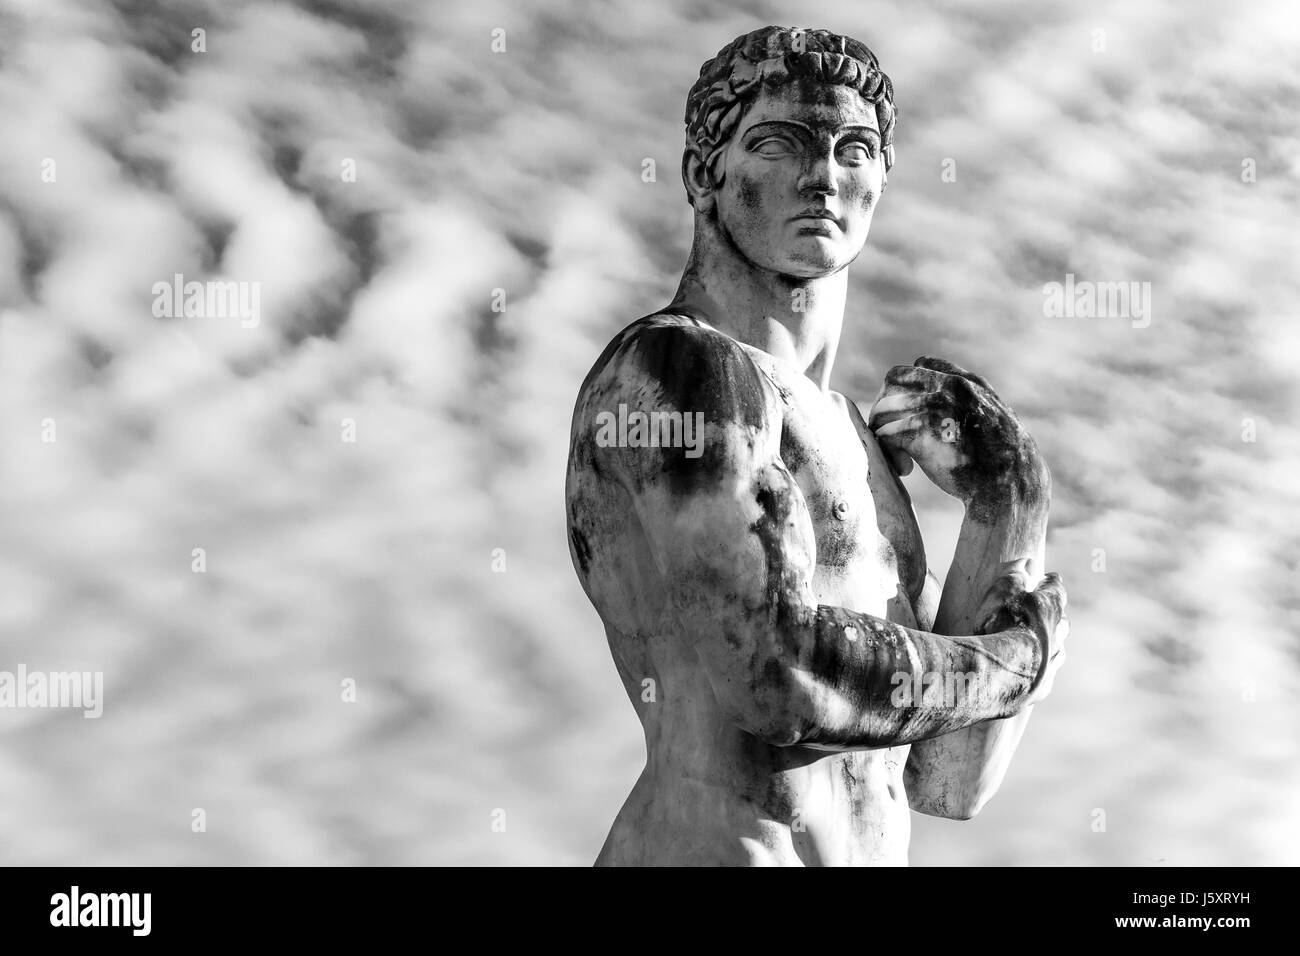 Idealized marble statue of an athlete at the Rome Stadio dei Marmi dramatic sky Stock Photo